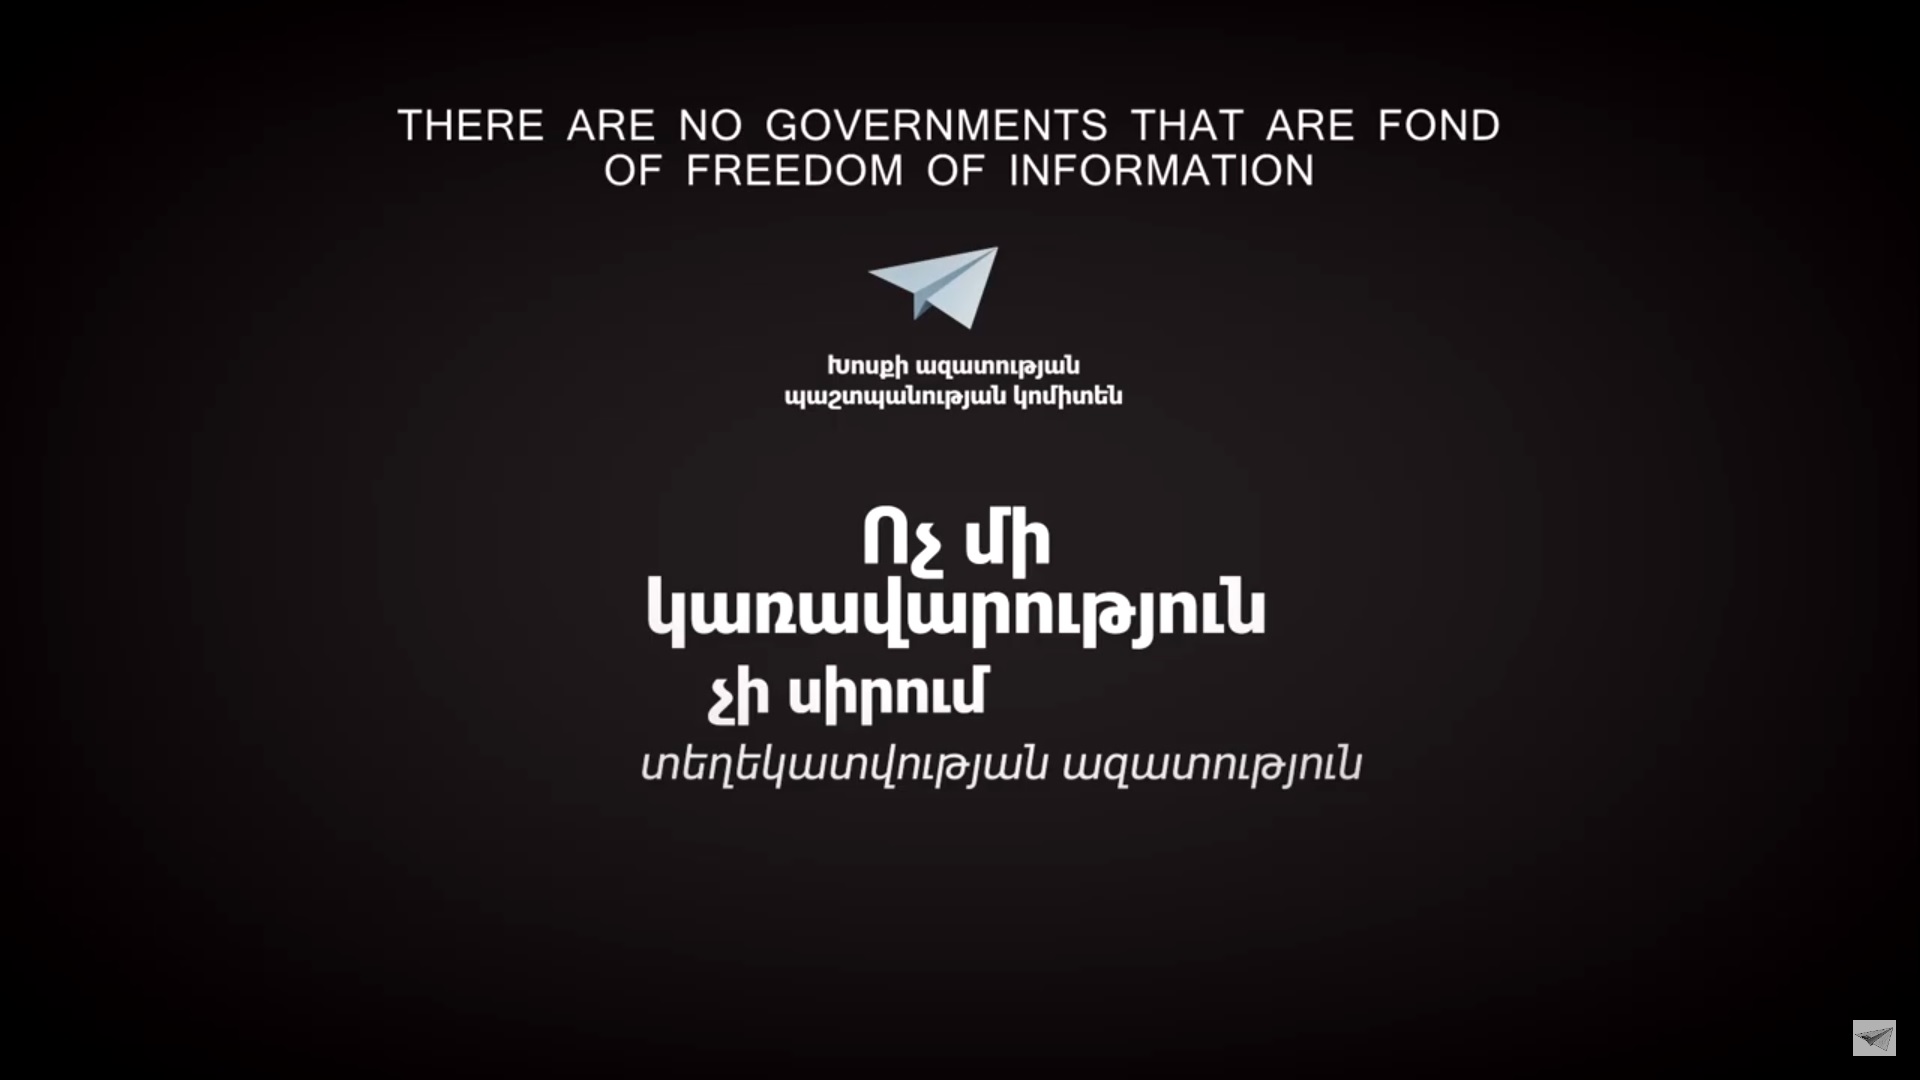 There are no governments that are fond of freedom of information